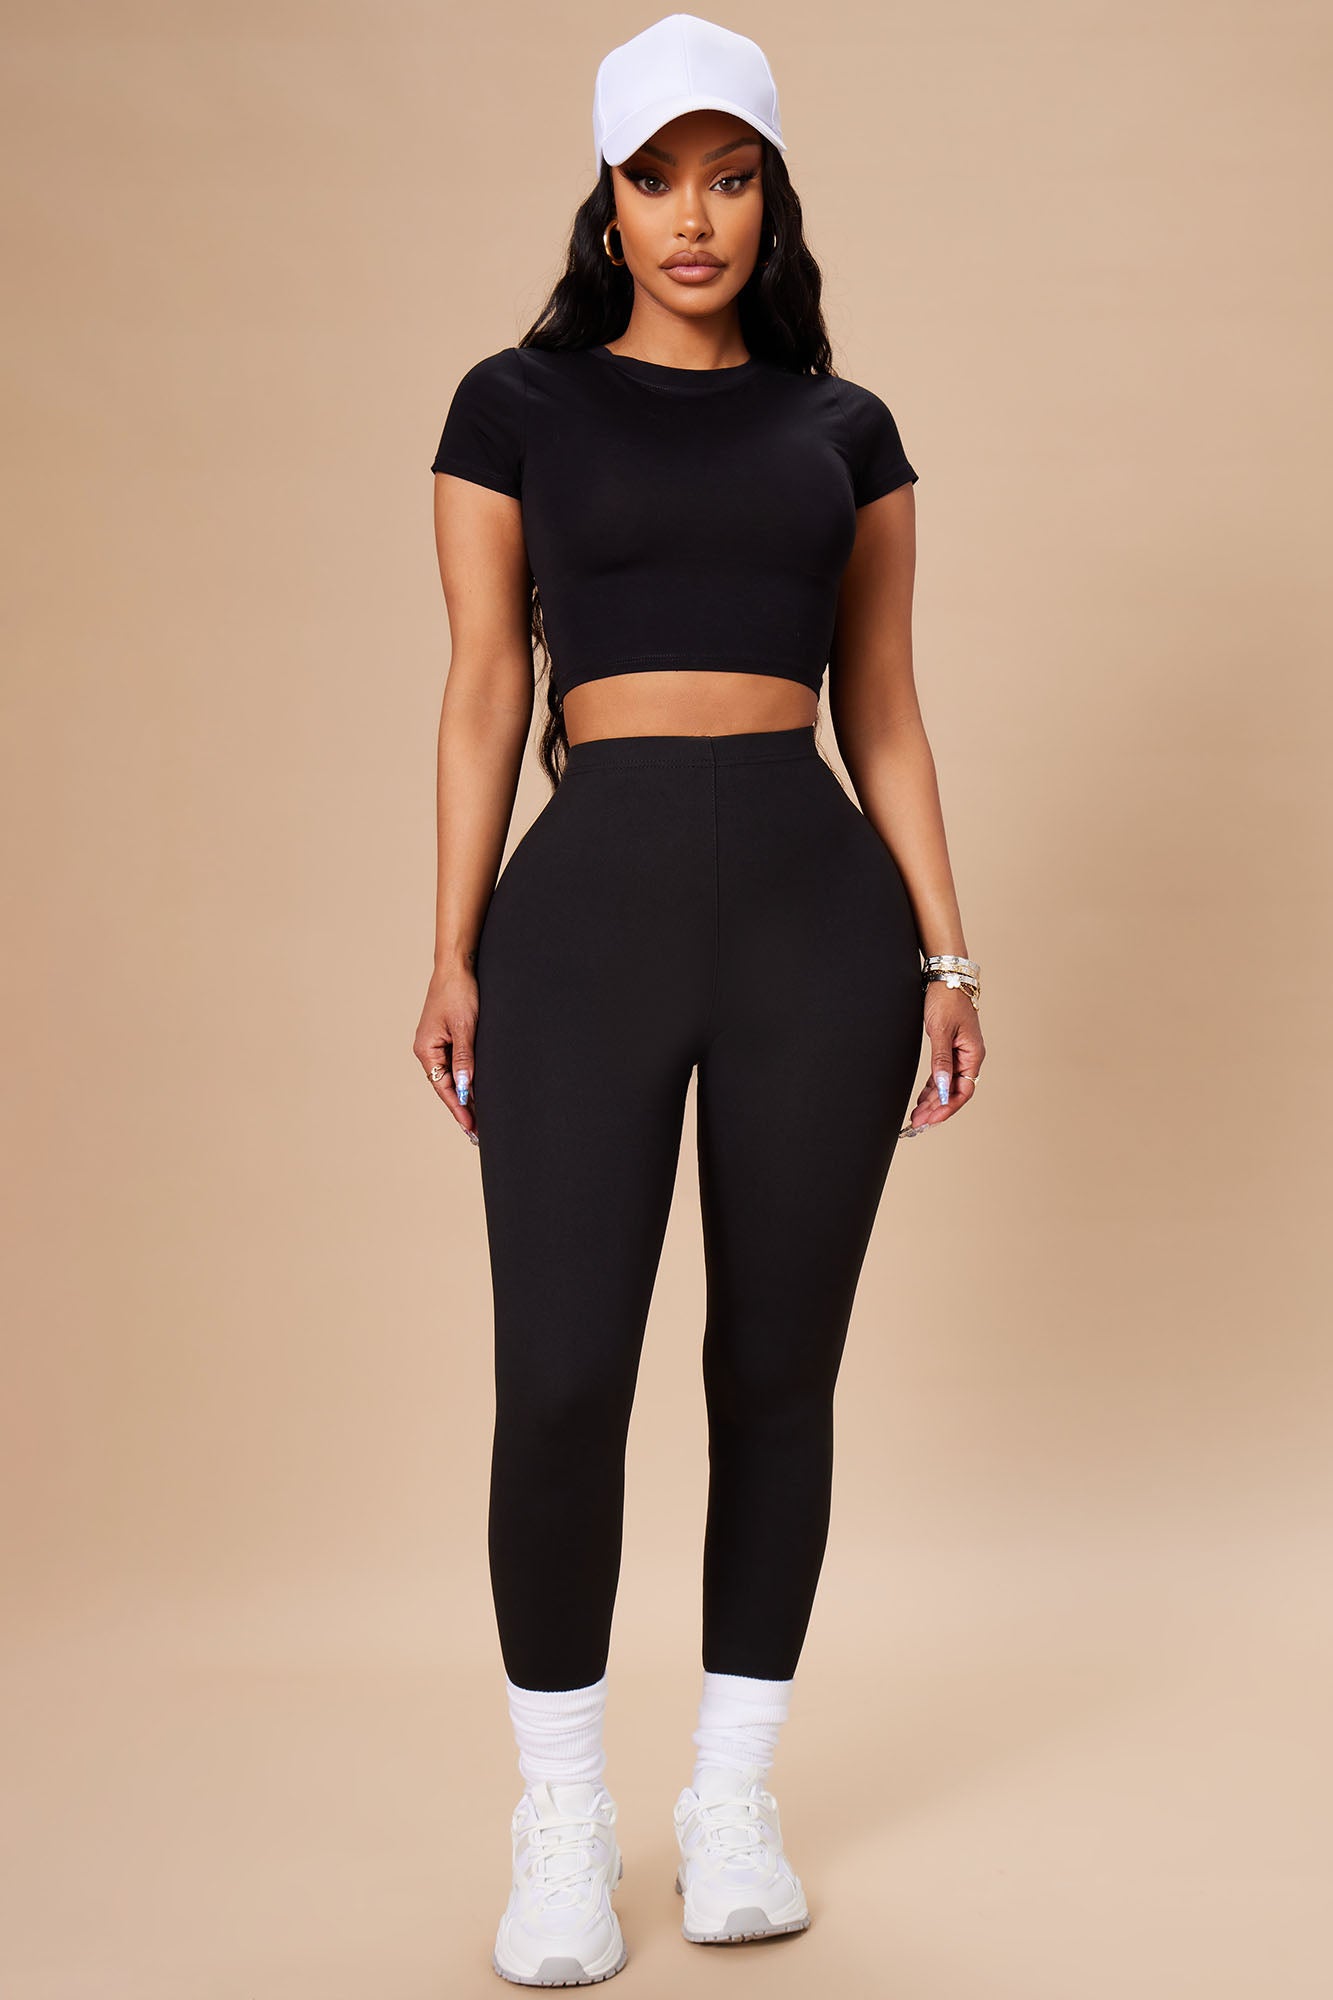 Almost Every Day Leggings - Black